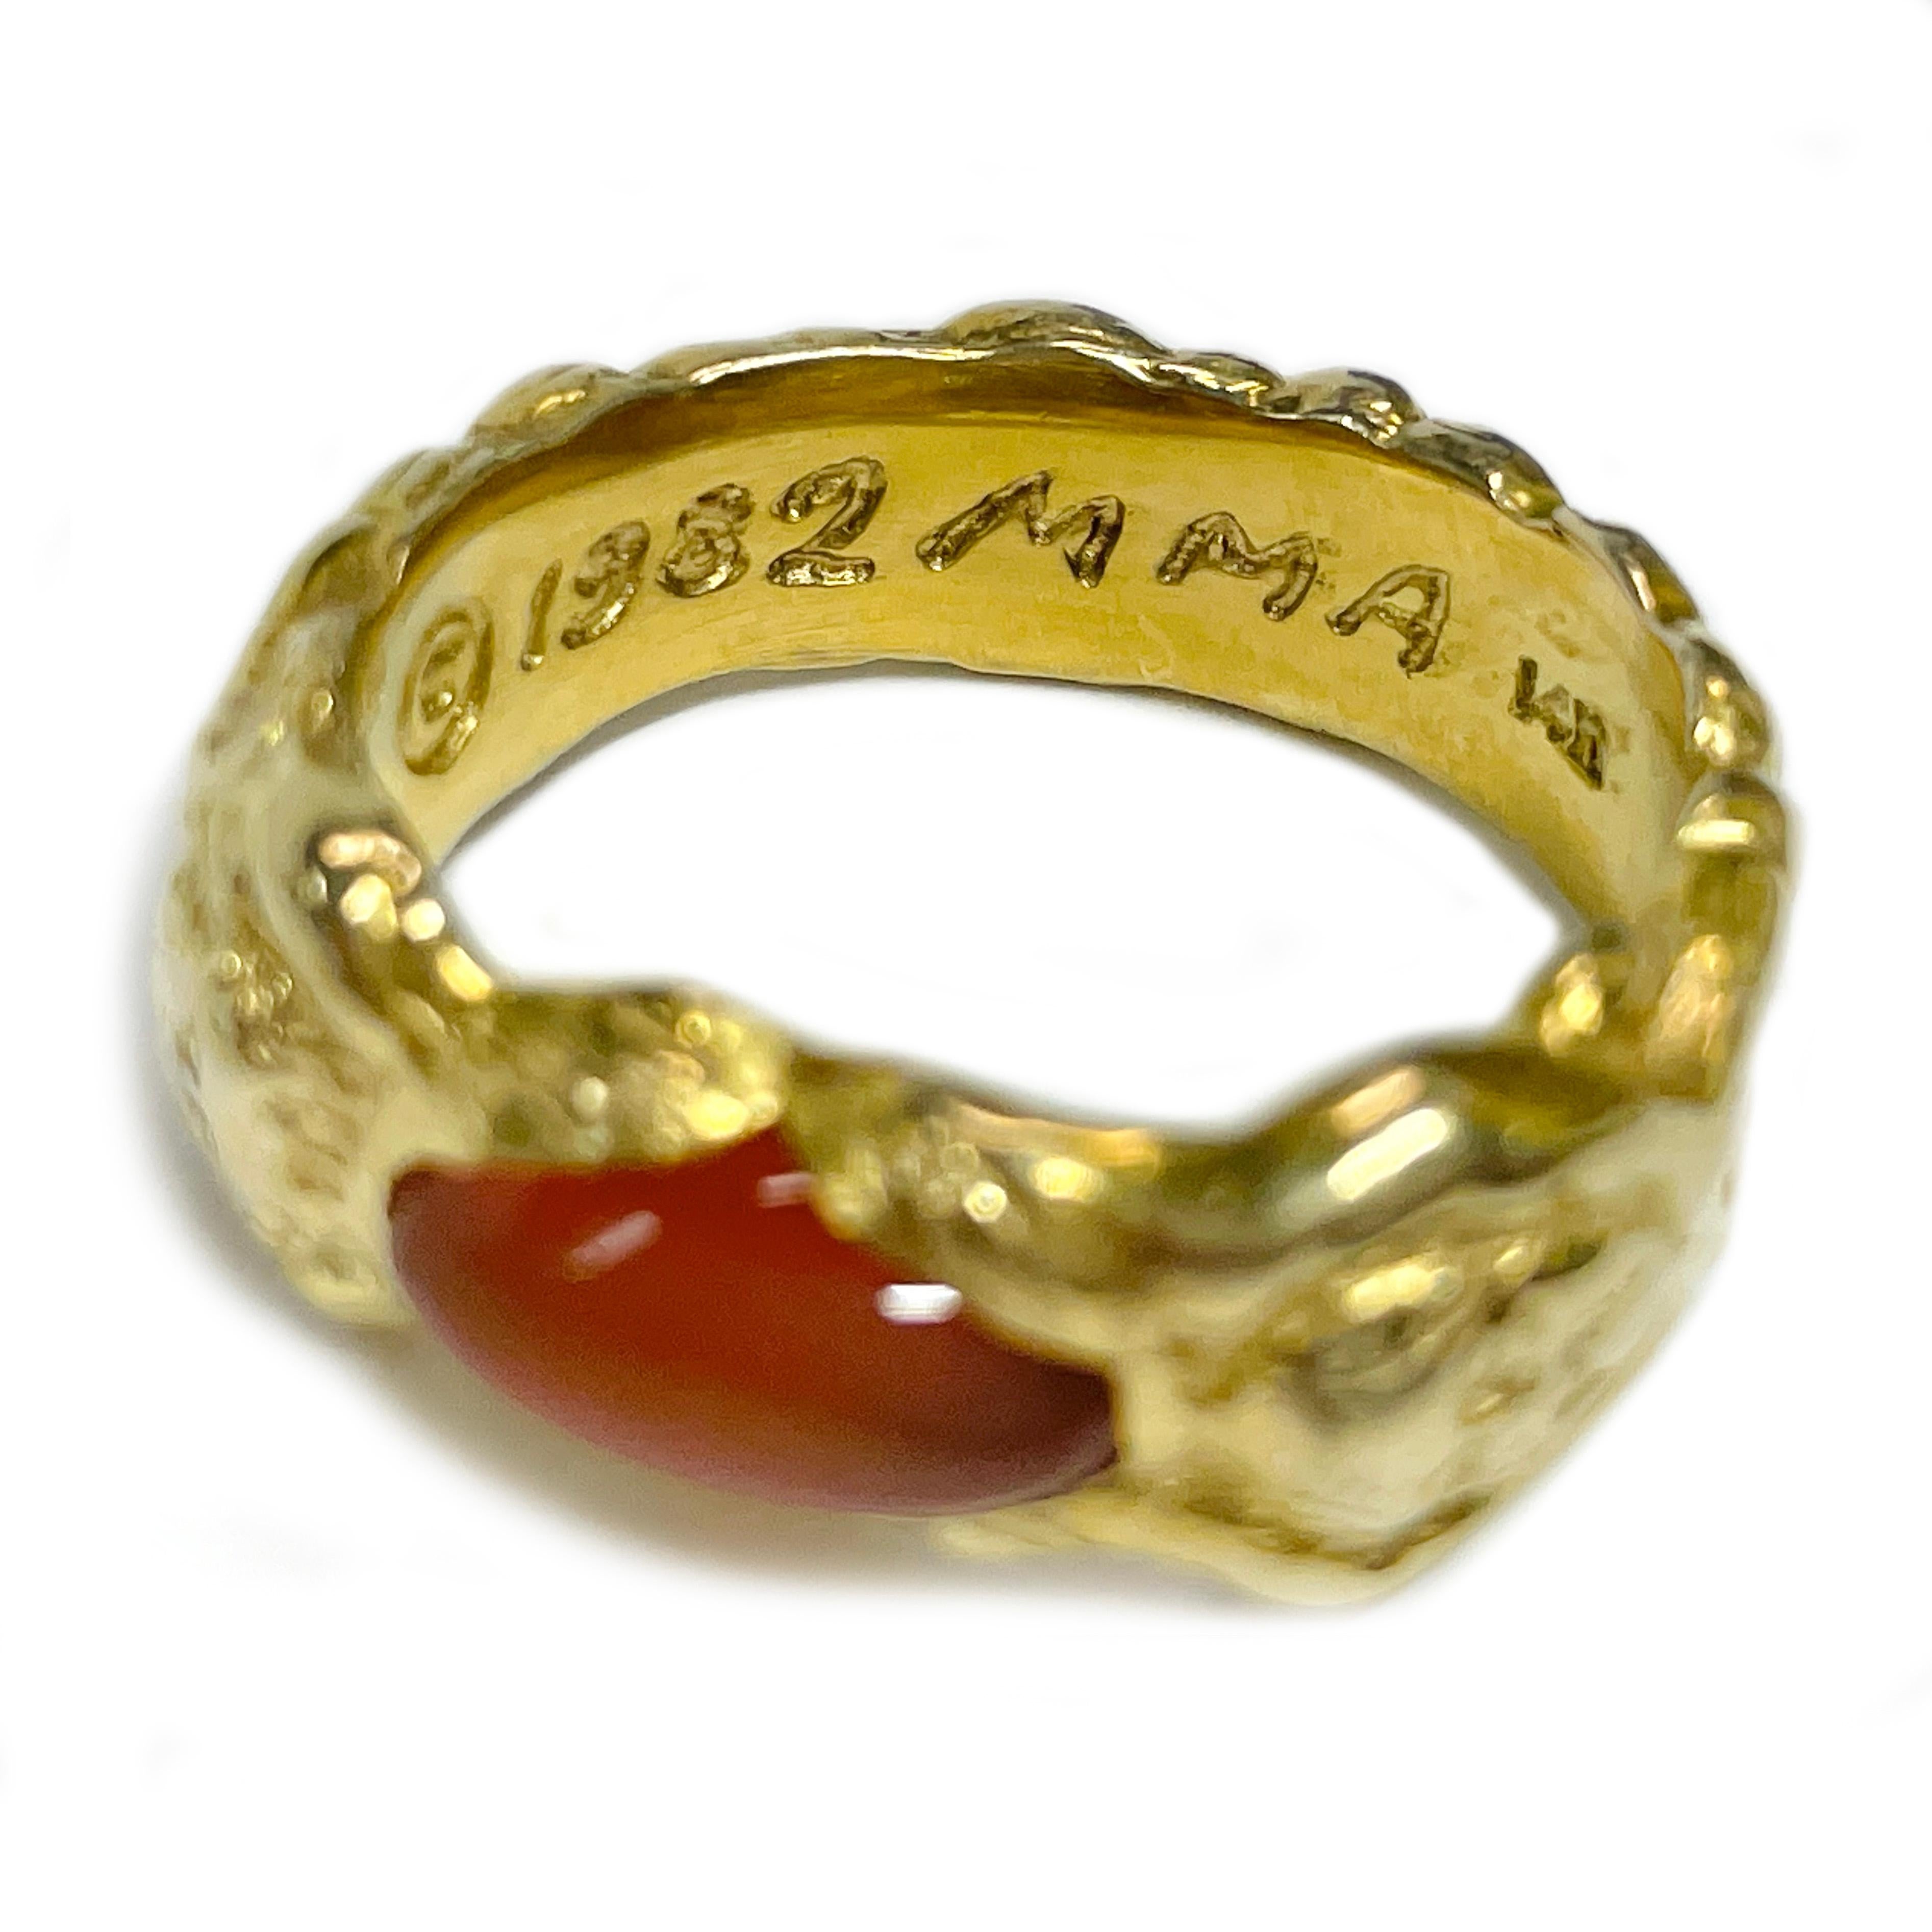 14 Karat Yellow Gold Carnelian Nugget Metropolitan Museum of Art (MMA) Ring. The ring features an oval 11 x 5.7mm Carnelian cabochon bezel-set with a lion head on each side of the band and an overall nugget texture. The oval dome-shaped cabochon is